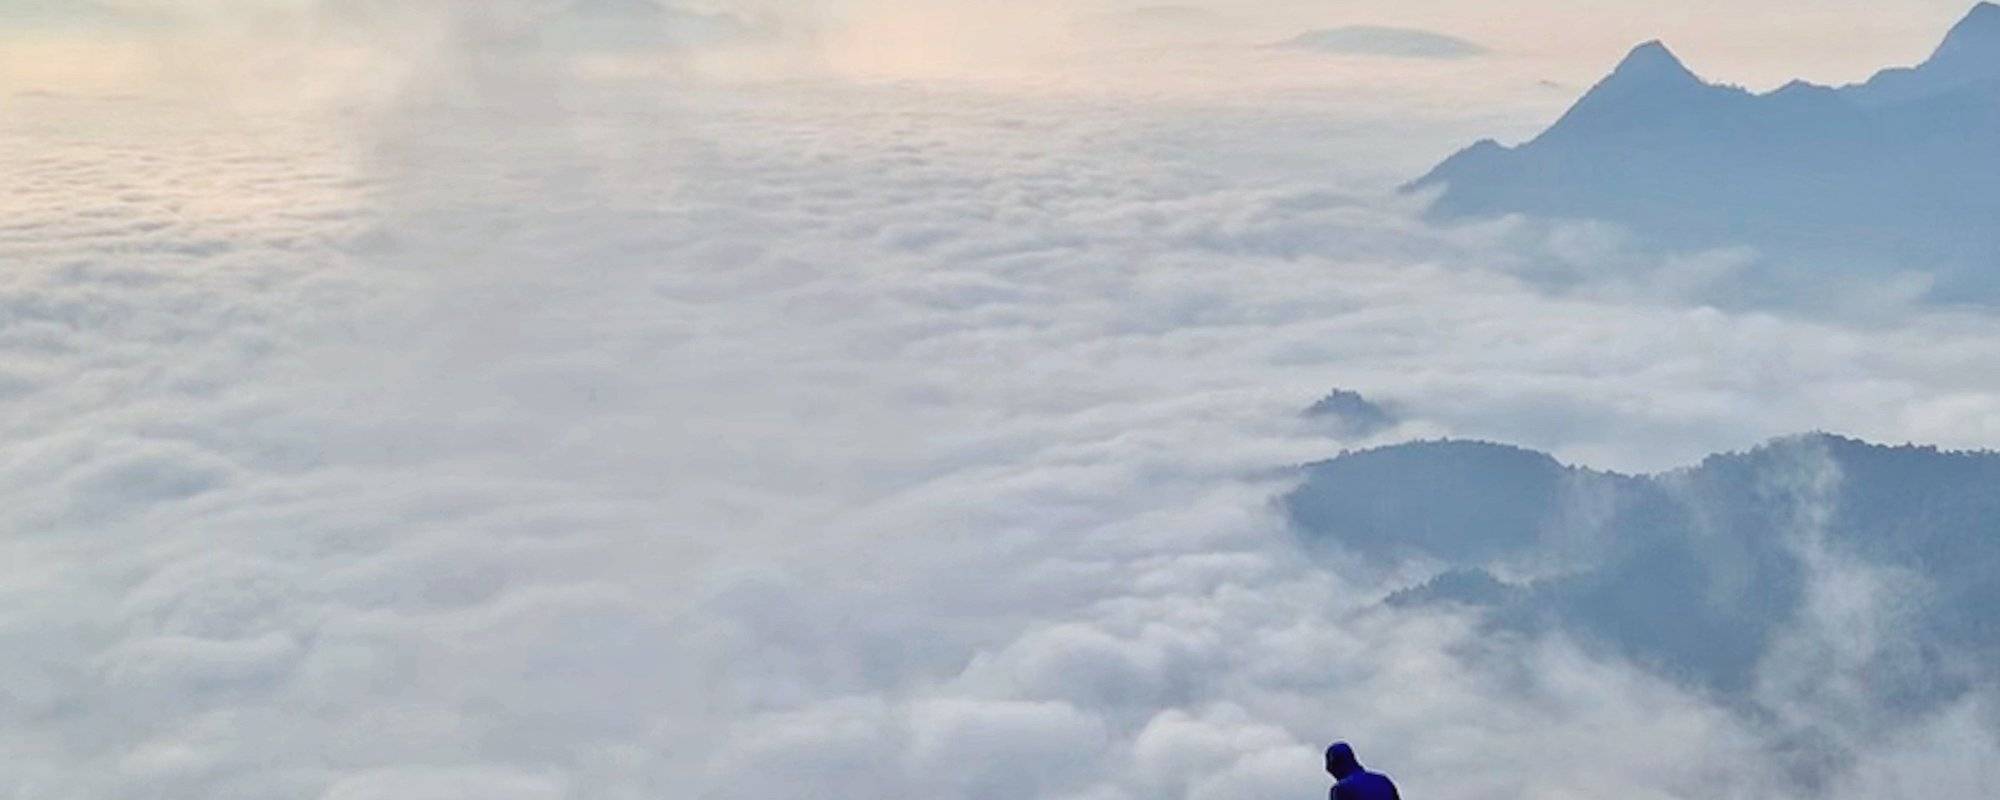 Above the clouds in Phu Chi Fa, The Most Breathtaking View! - Chiang Rai, Thailand